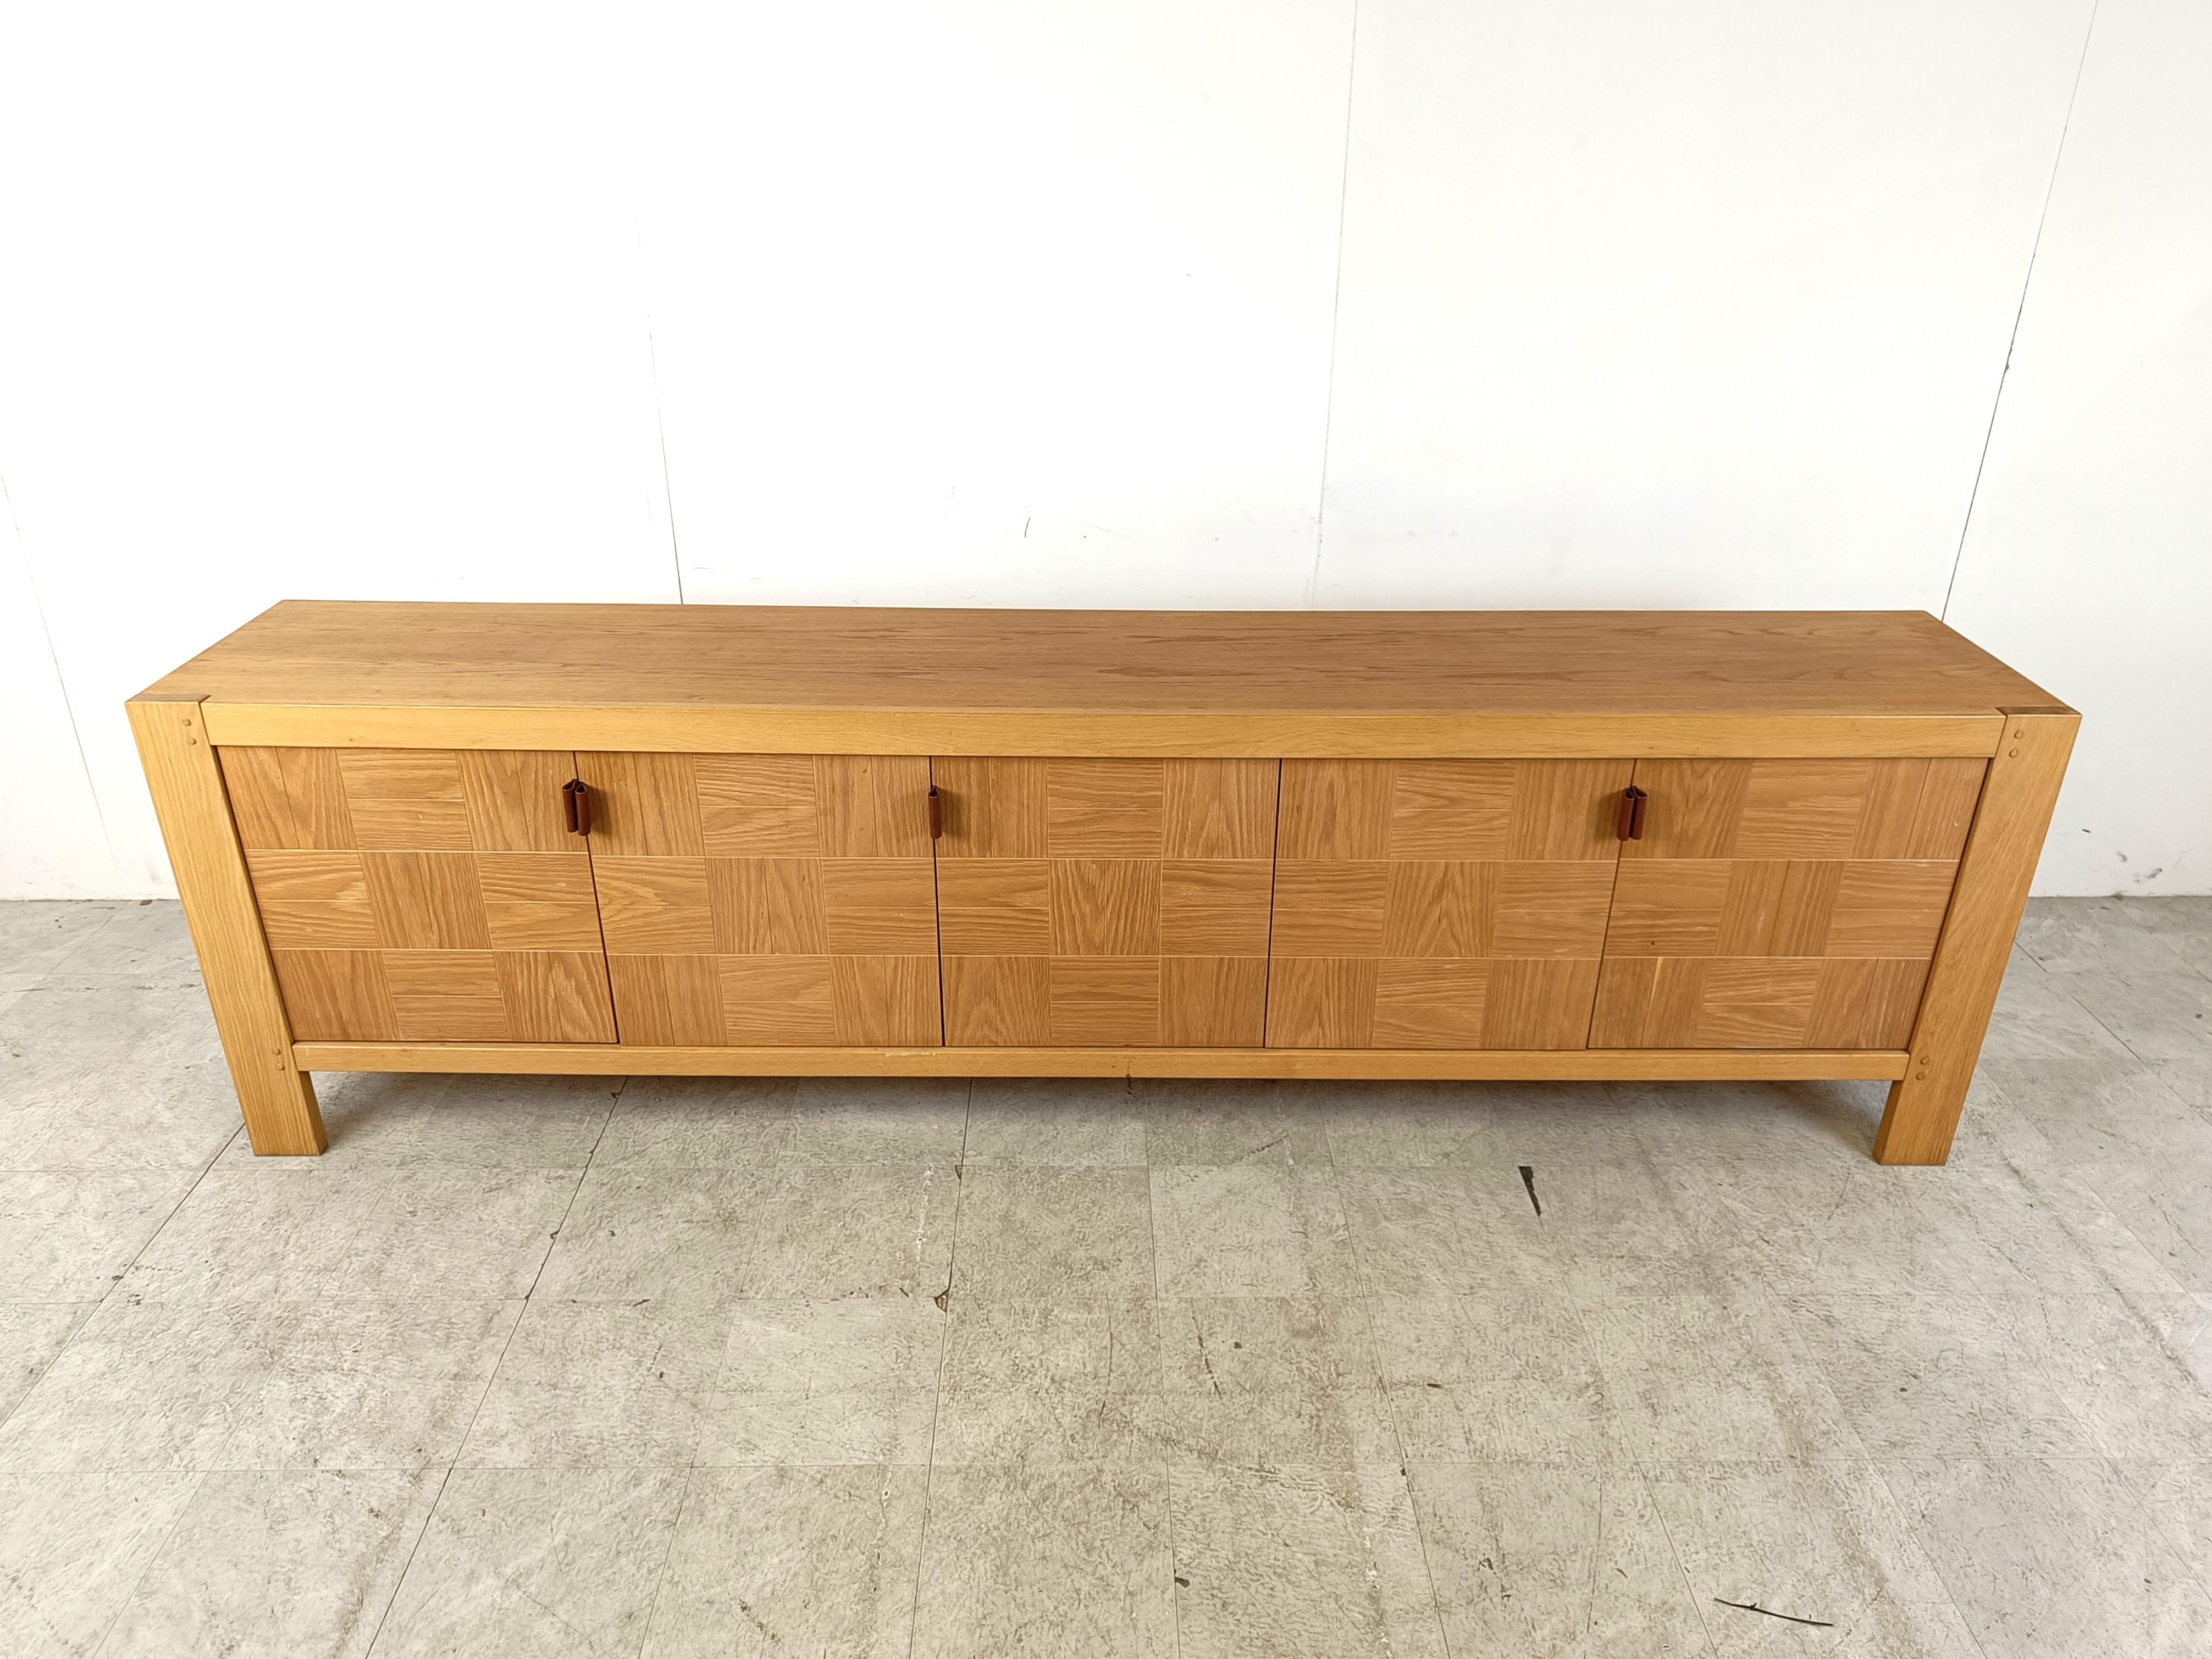 Brown 5 door credenza or sideboard by Frans Defour for Defour.

Beautiful timeless sideboard with inlaid grained oak tiles and leather door handles.

The sideboard offers plenty of storage space.

Good condition

1970s - Belgium

Dimensions:
Lenght: